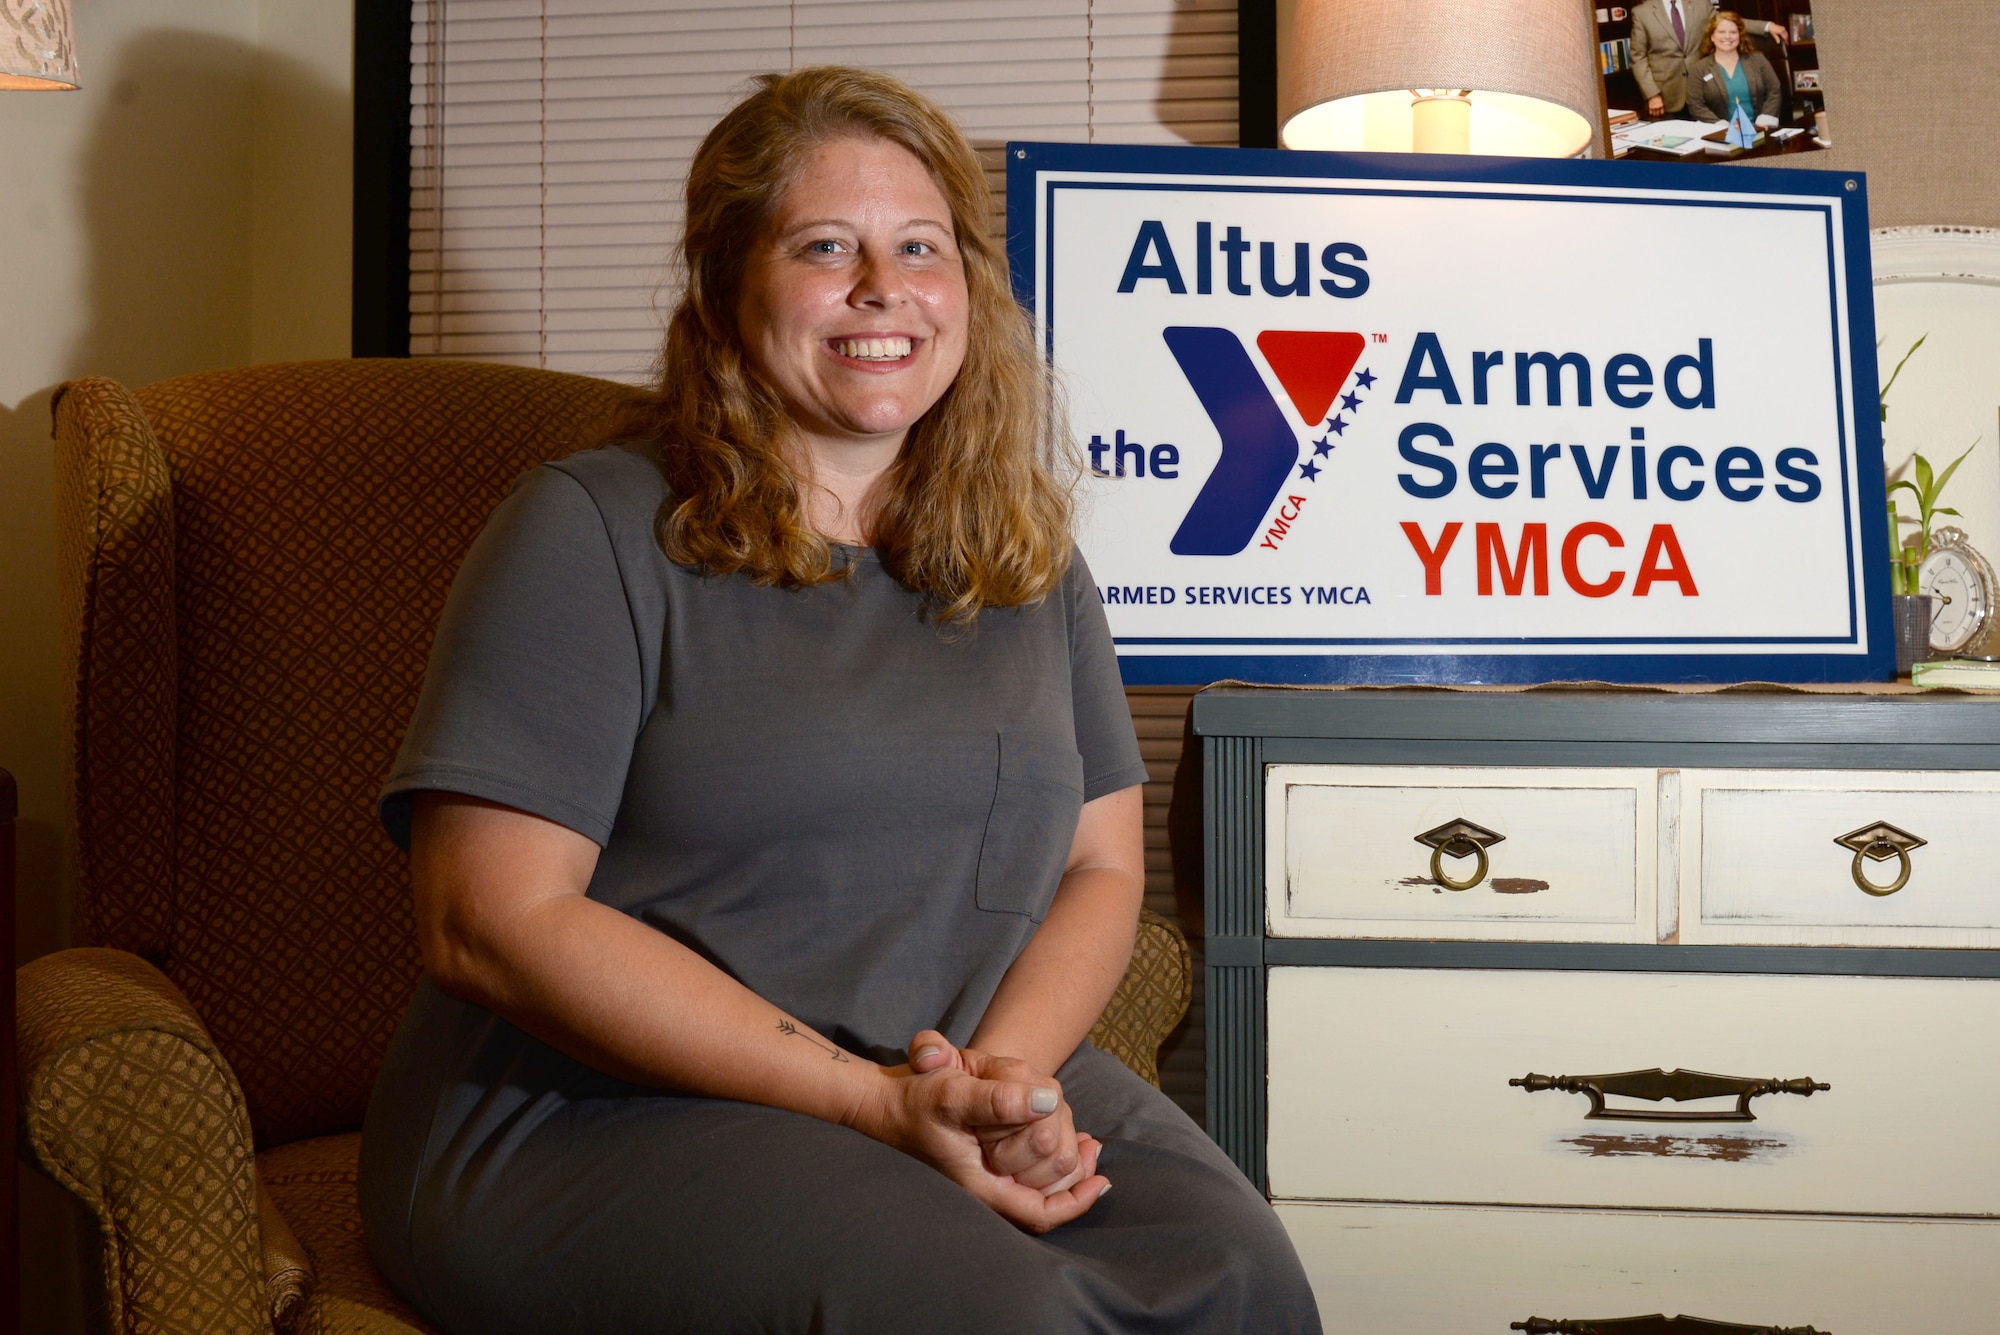 Loran Mayes, Altus AFB Armed Services YMCA executive director, poses for a photo, June 12, 2017, at Altus Air Force Base, Oklahoma. The ASYMCA’s main focus is to provide programs and services to make life easier for military members E-5 and lower and their families for little to no cost. (U.S. Air Force photo by Airman 1st Class Cody Dowell/released)